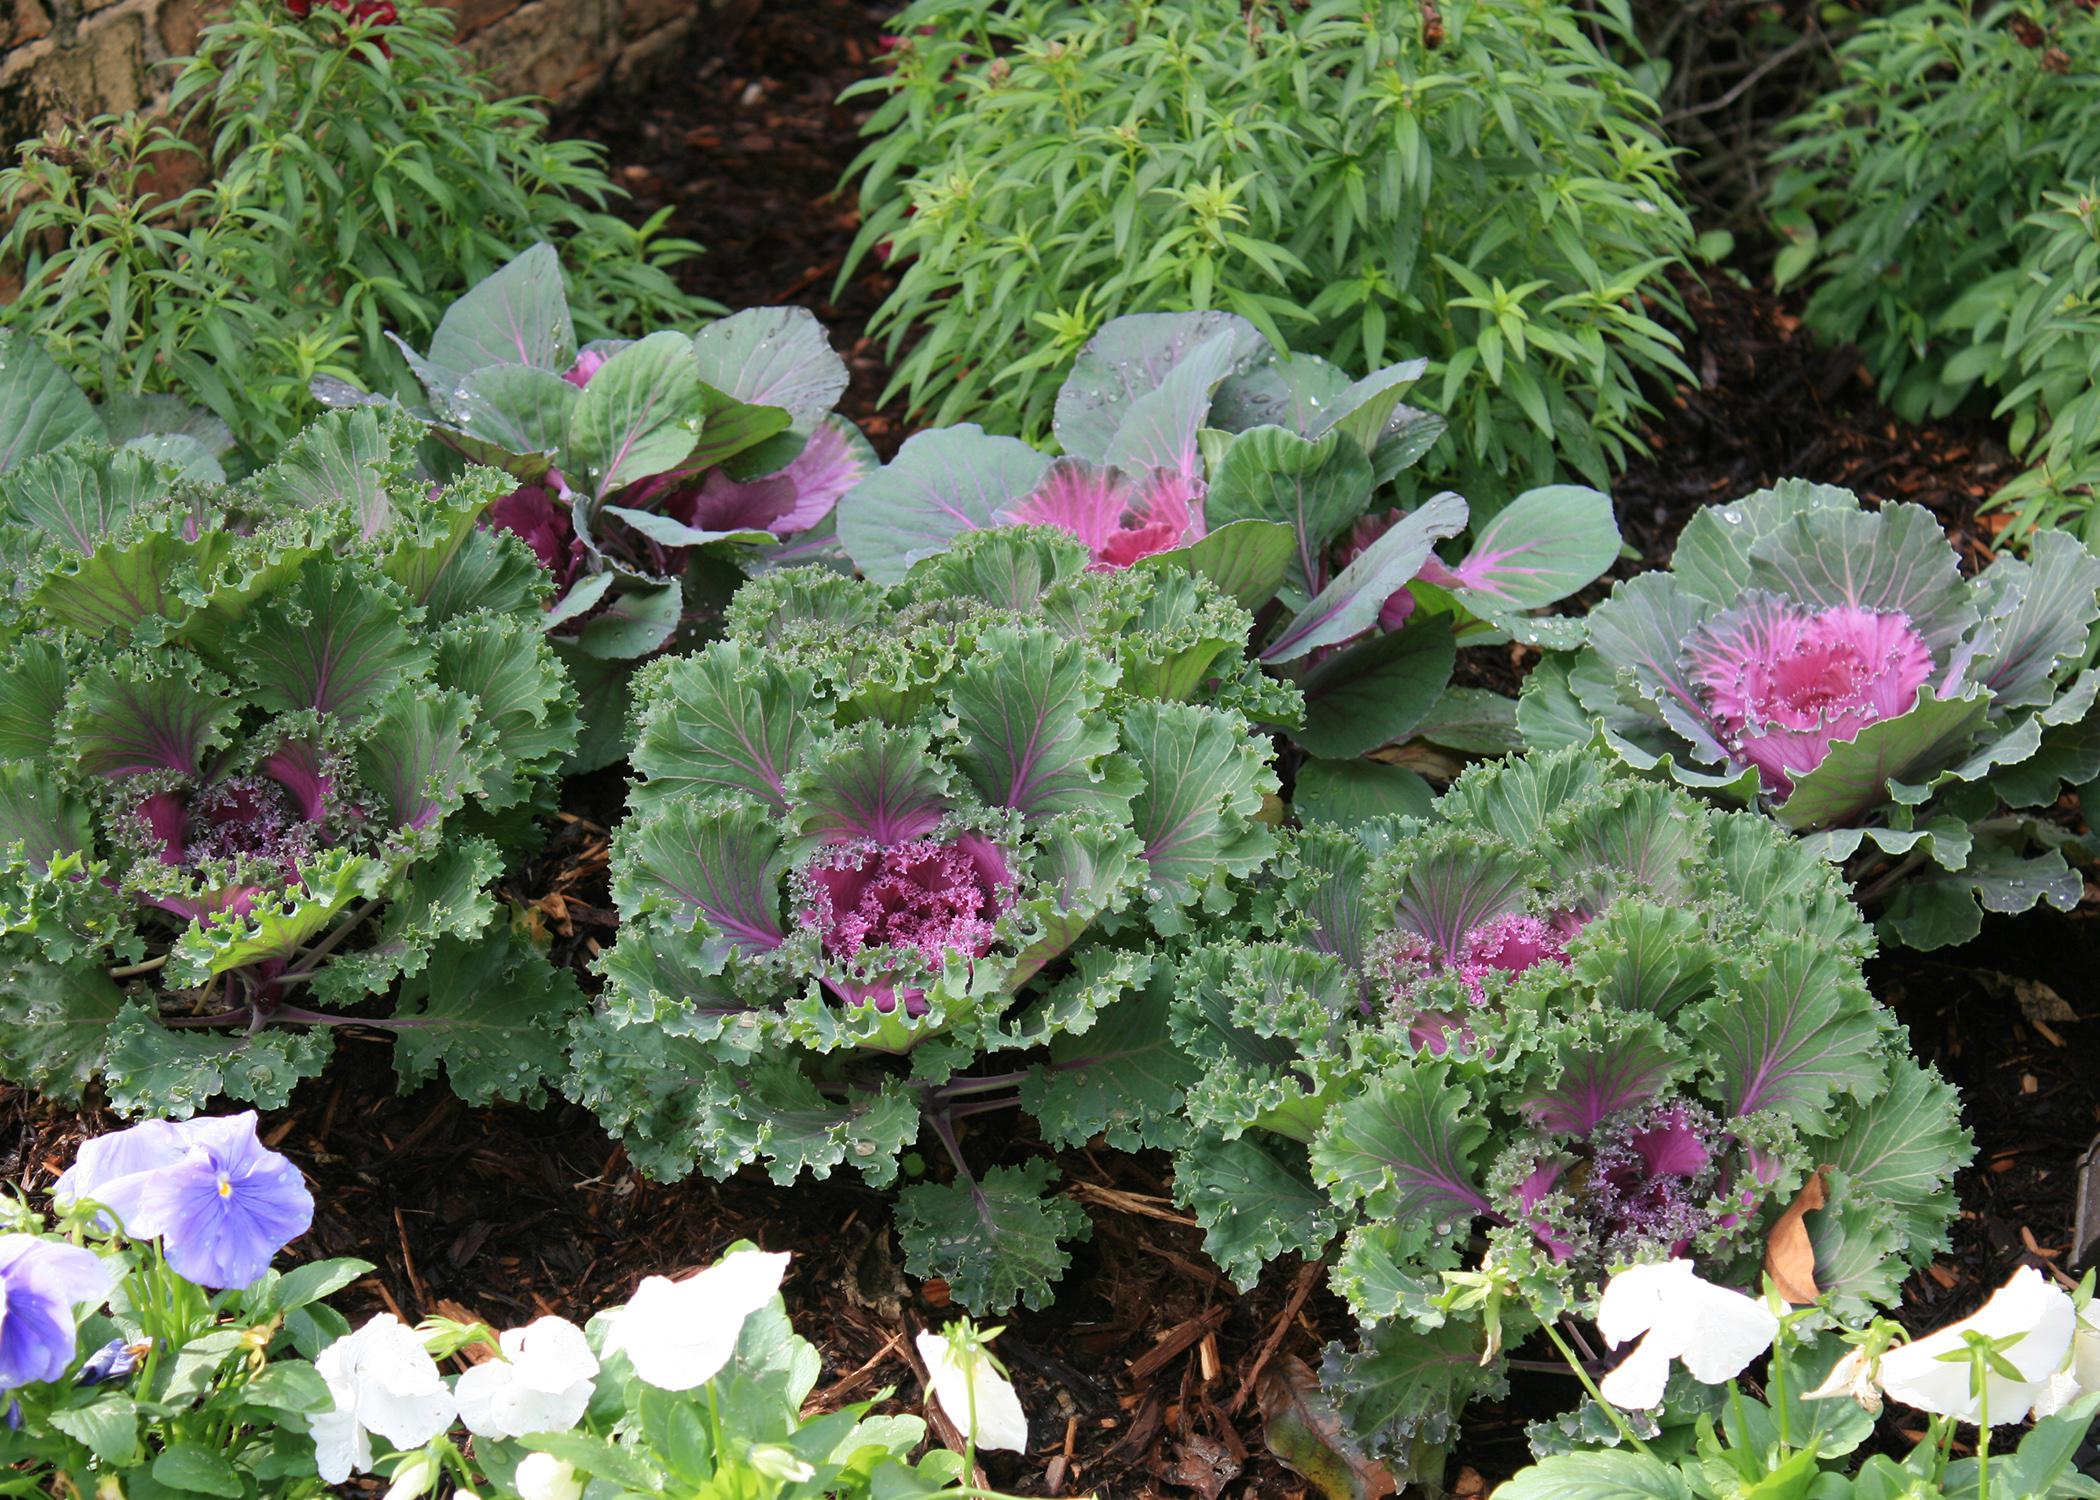 Ornamental kale and cabbage provide easy fall and winter color. (Photo by MSU Extension Service/Gary Bachman)